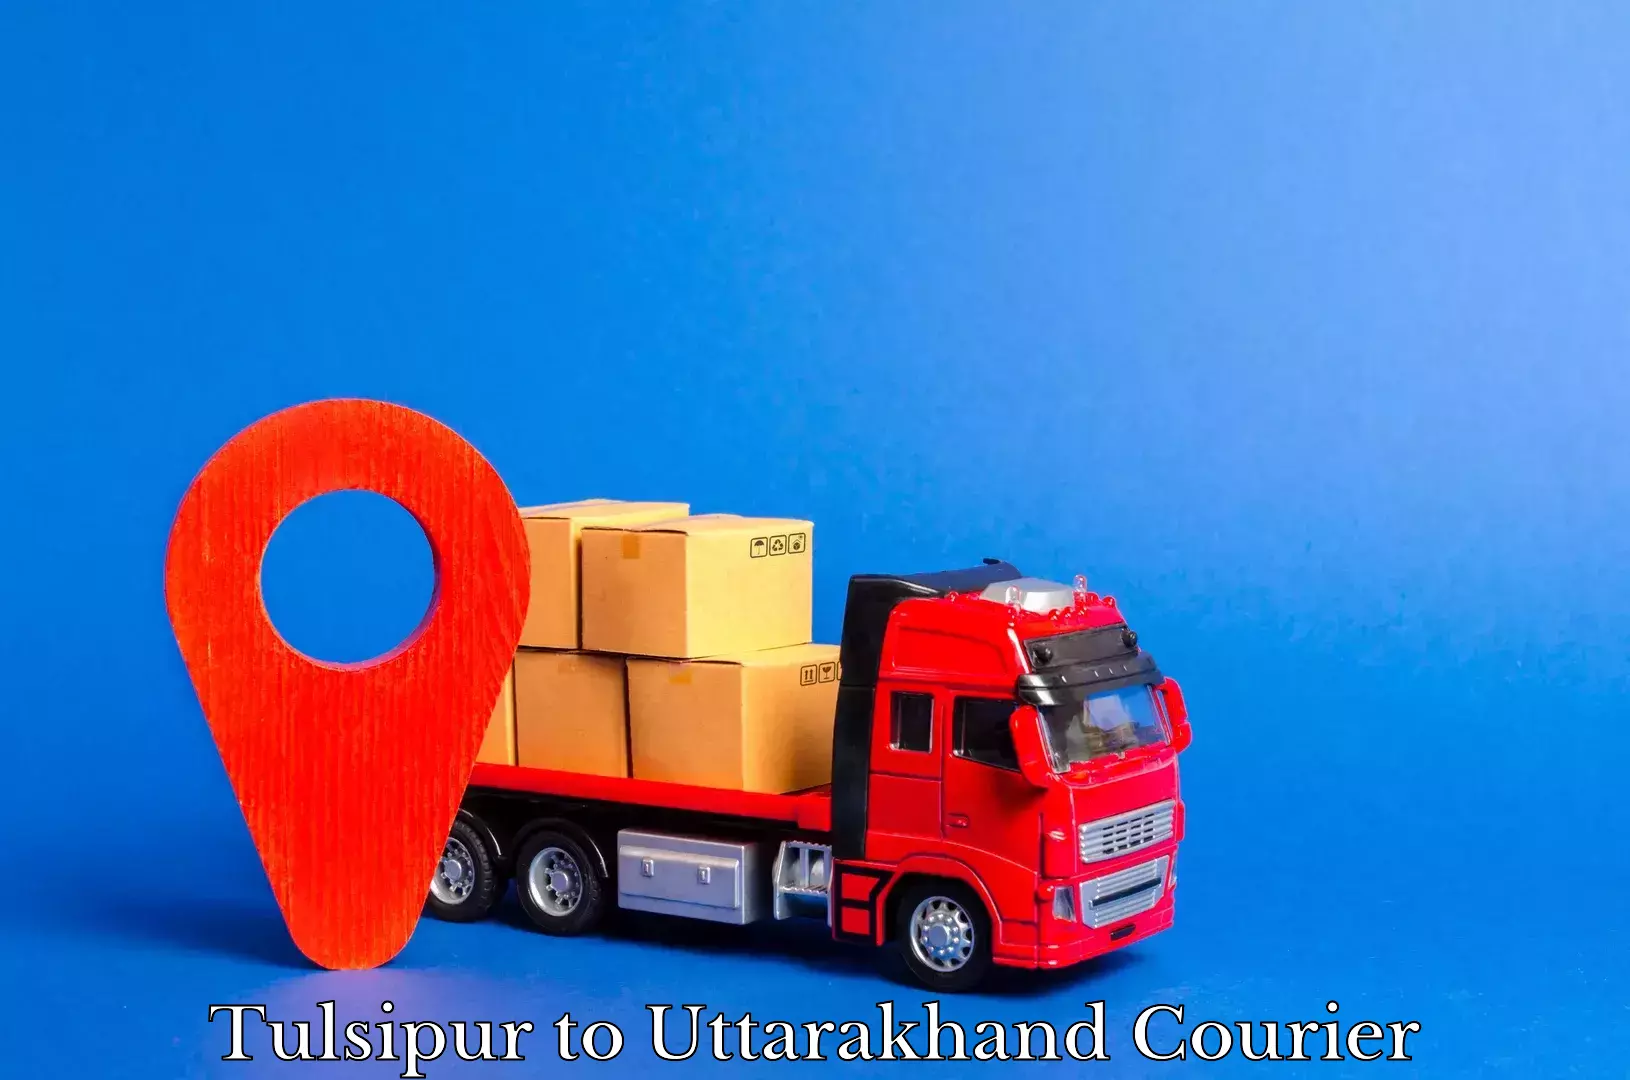 Tech-enabled shipping Tulsipur to Uttarakhand